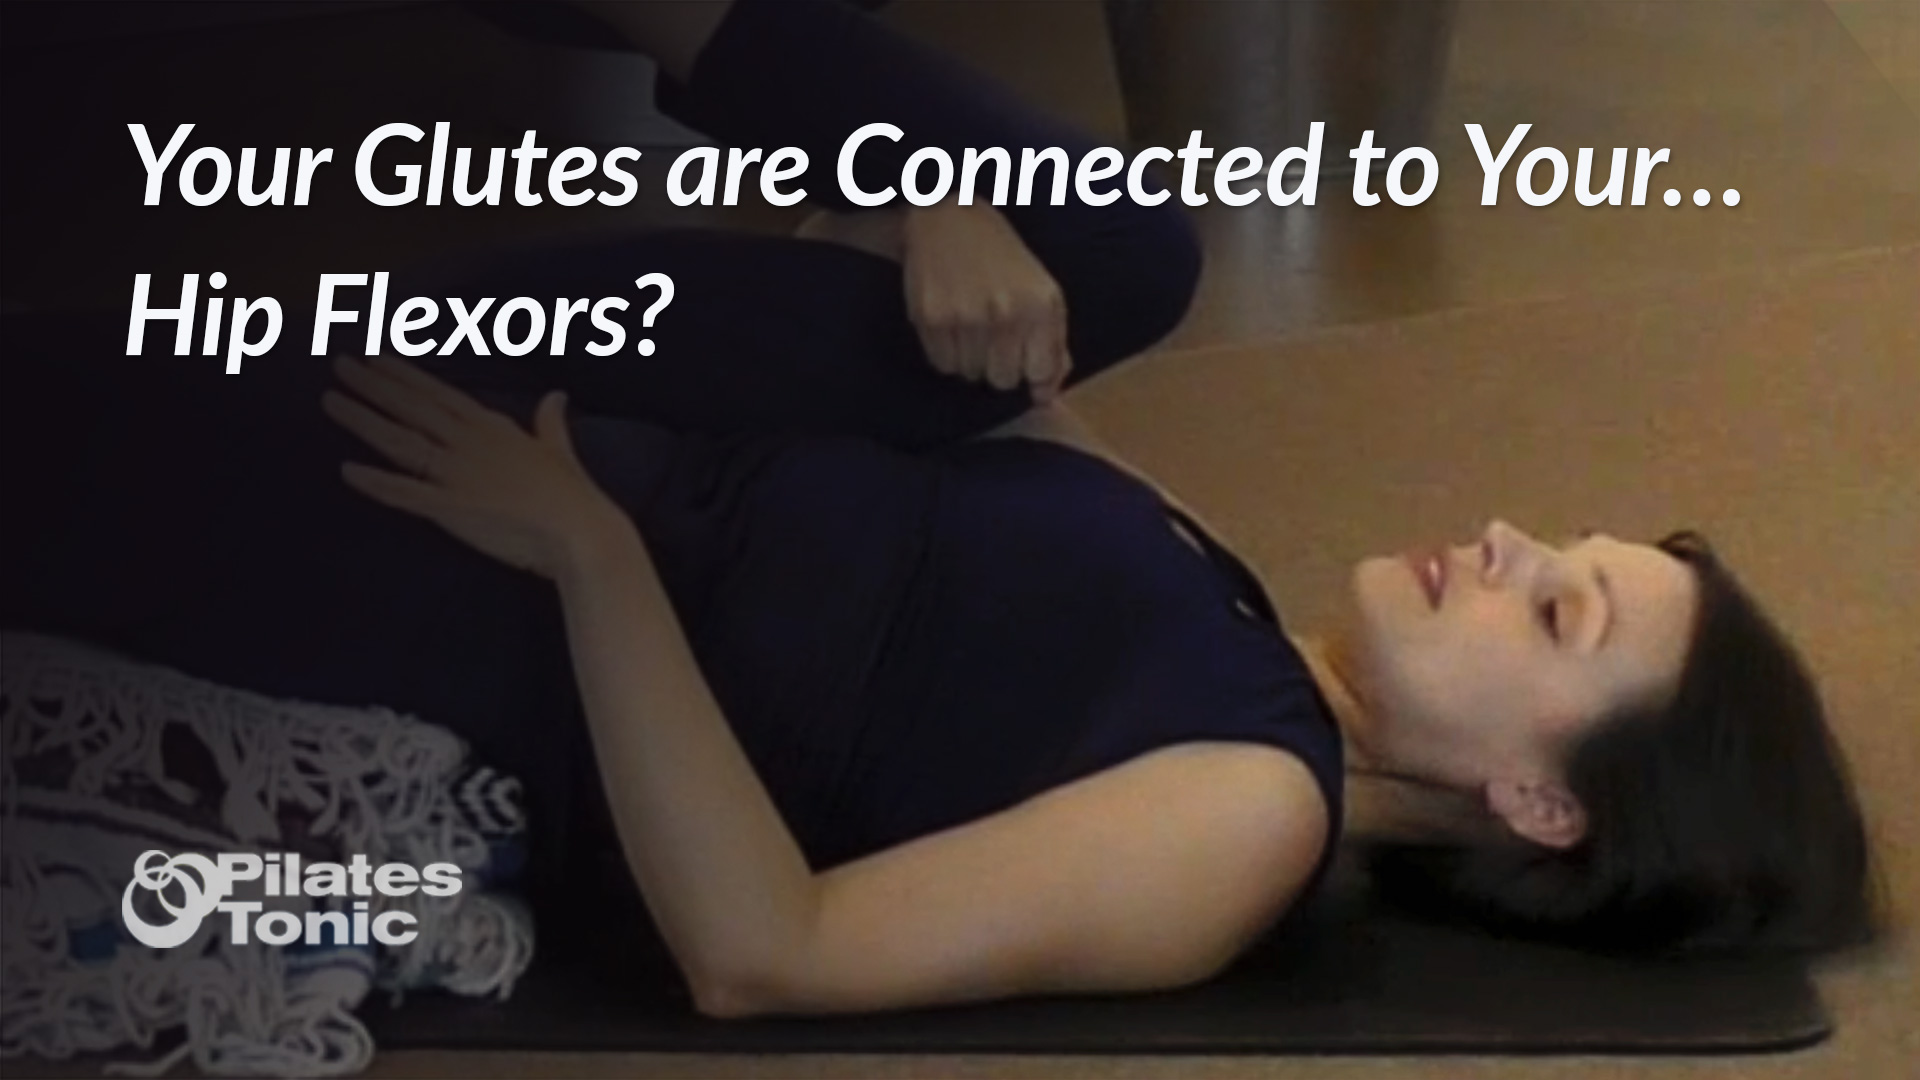 Your Glutes Are Connected to Your Hip Flexors image - supine stretch